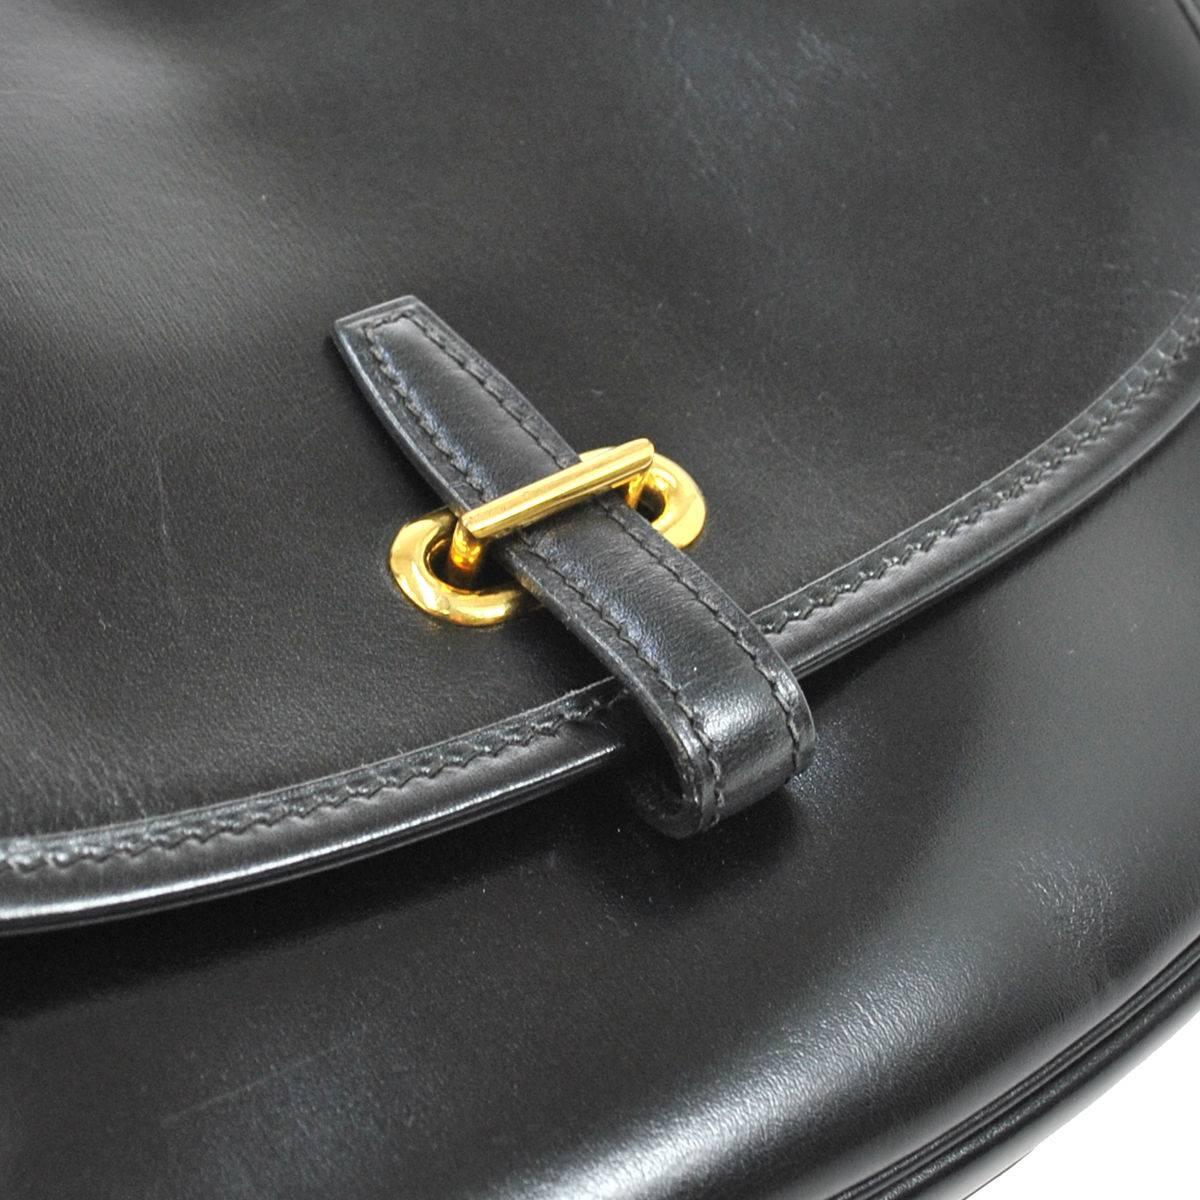 CURATOR'S NOTES

Hermes Vintage Black Leather Gold Hardware Evening Shoulder Crossbody Flap Bag  

Style Tip: Tuck the shoulder straps and wear as a clutch for ultimate versatility!

Leather
Gold hardware
Buckle closure
Made in France
Date code